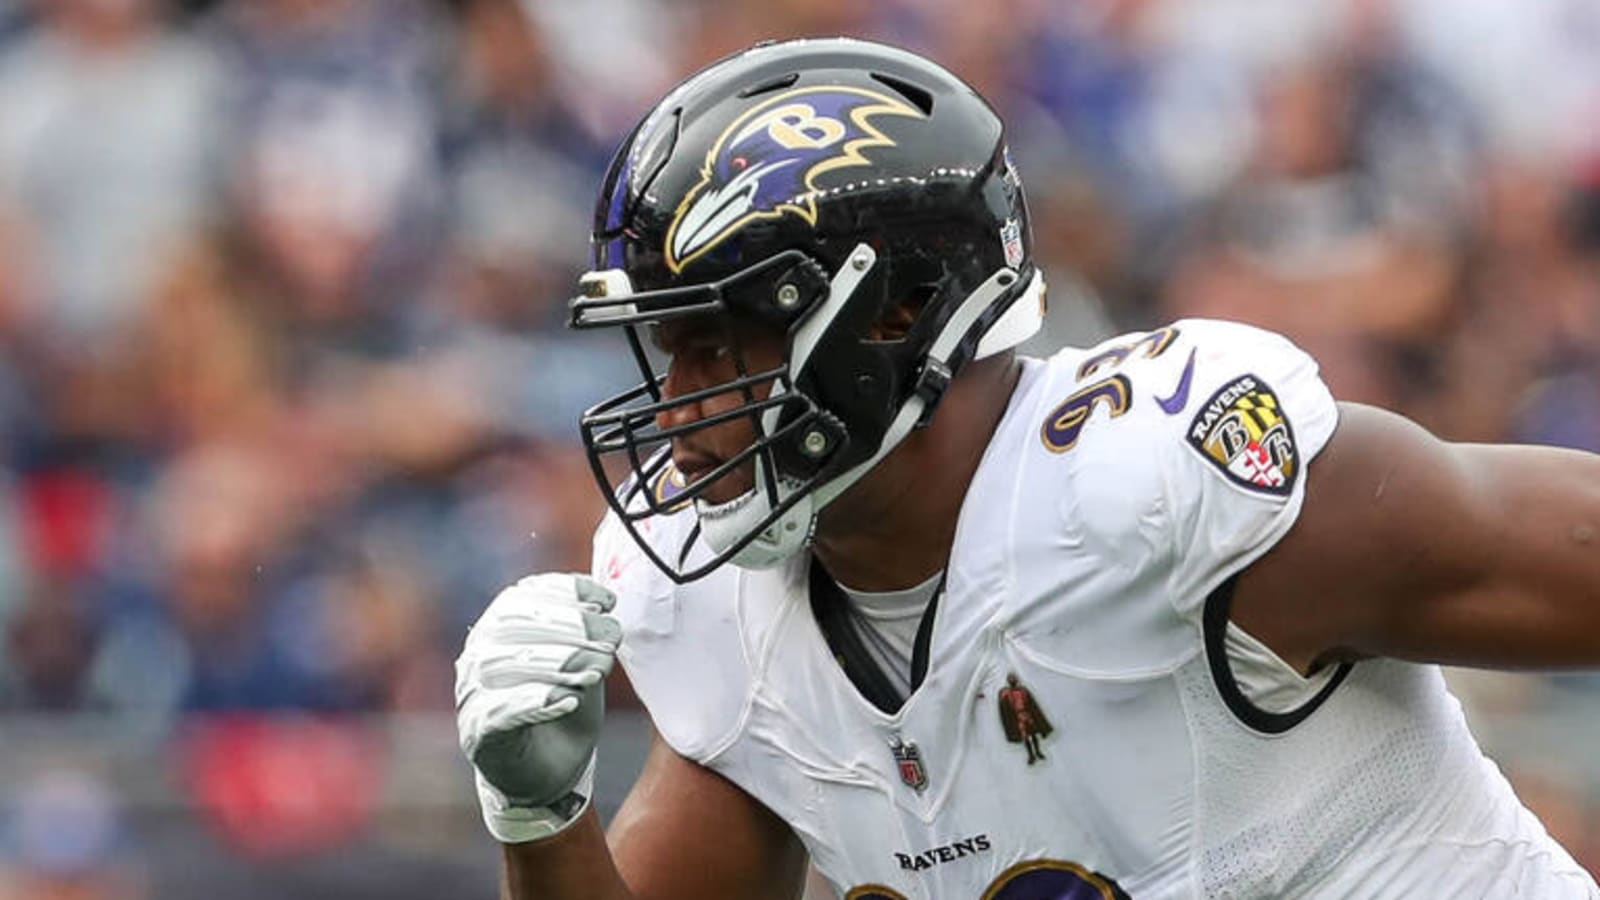 Ravens to be without DE Campbell vs. Steelers